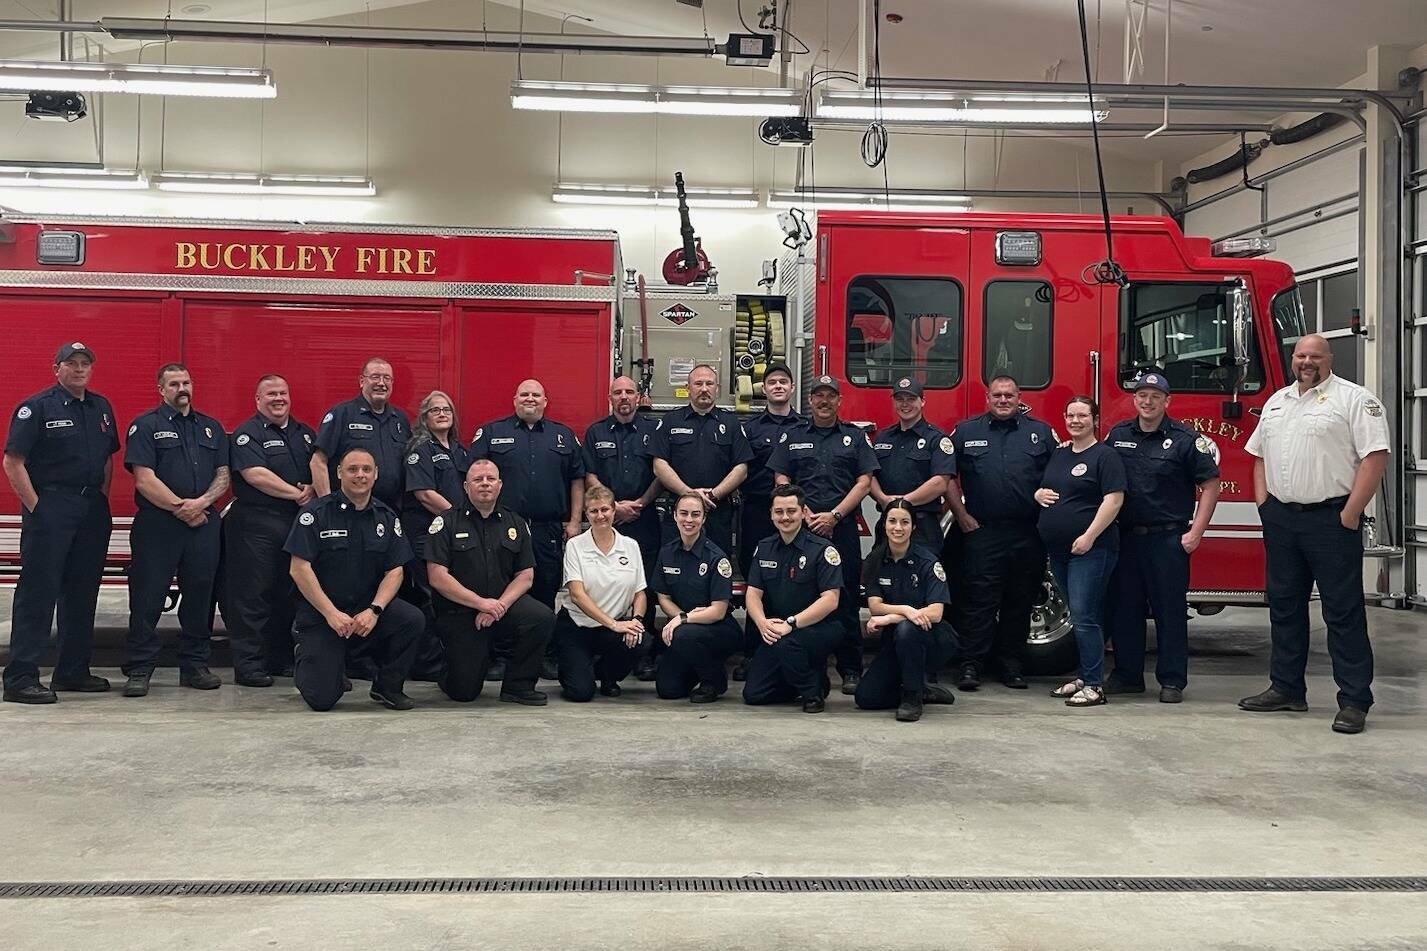 Photo Courtesy of Eric Skogen
The city of Buckley’s fire department consists of four full-time fighters, and the rest are volunteers. If voters approve a EMS levy lid lift, the city hopes to hire an additional full-time first responder.